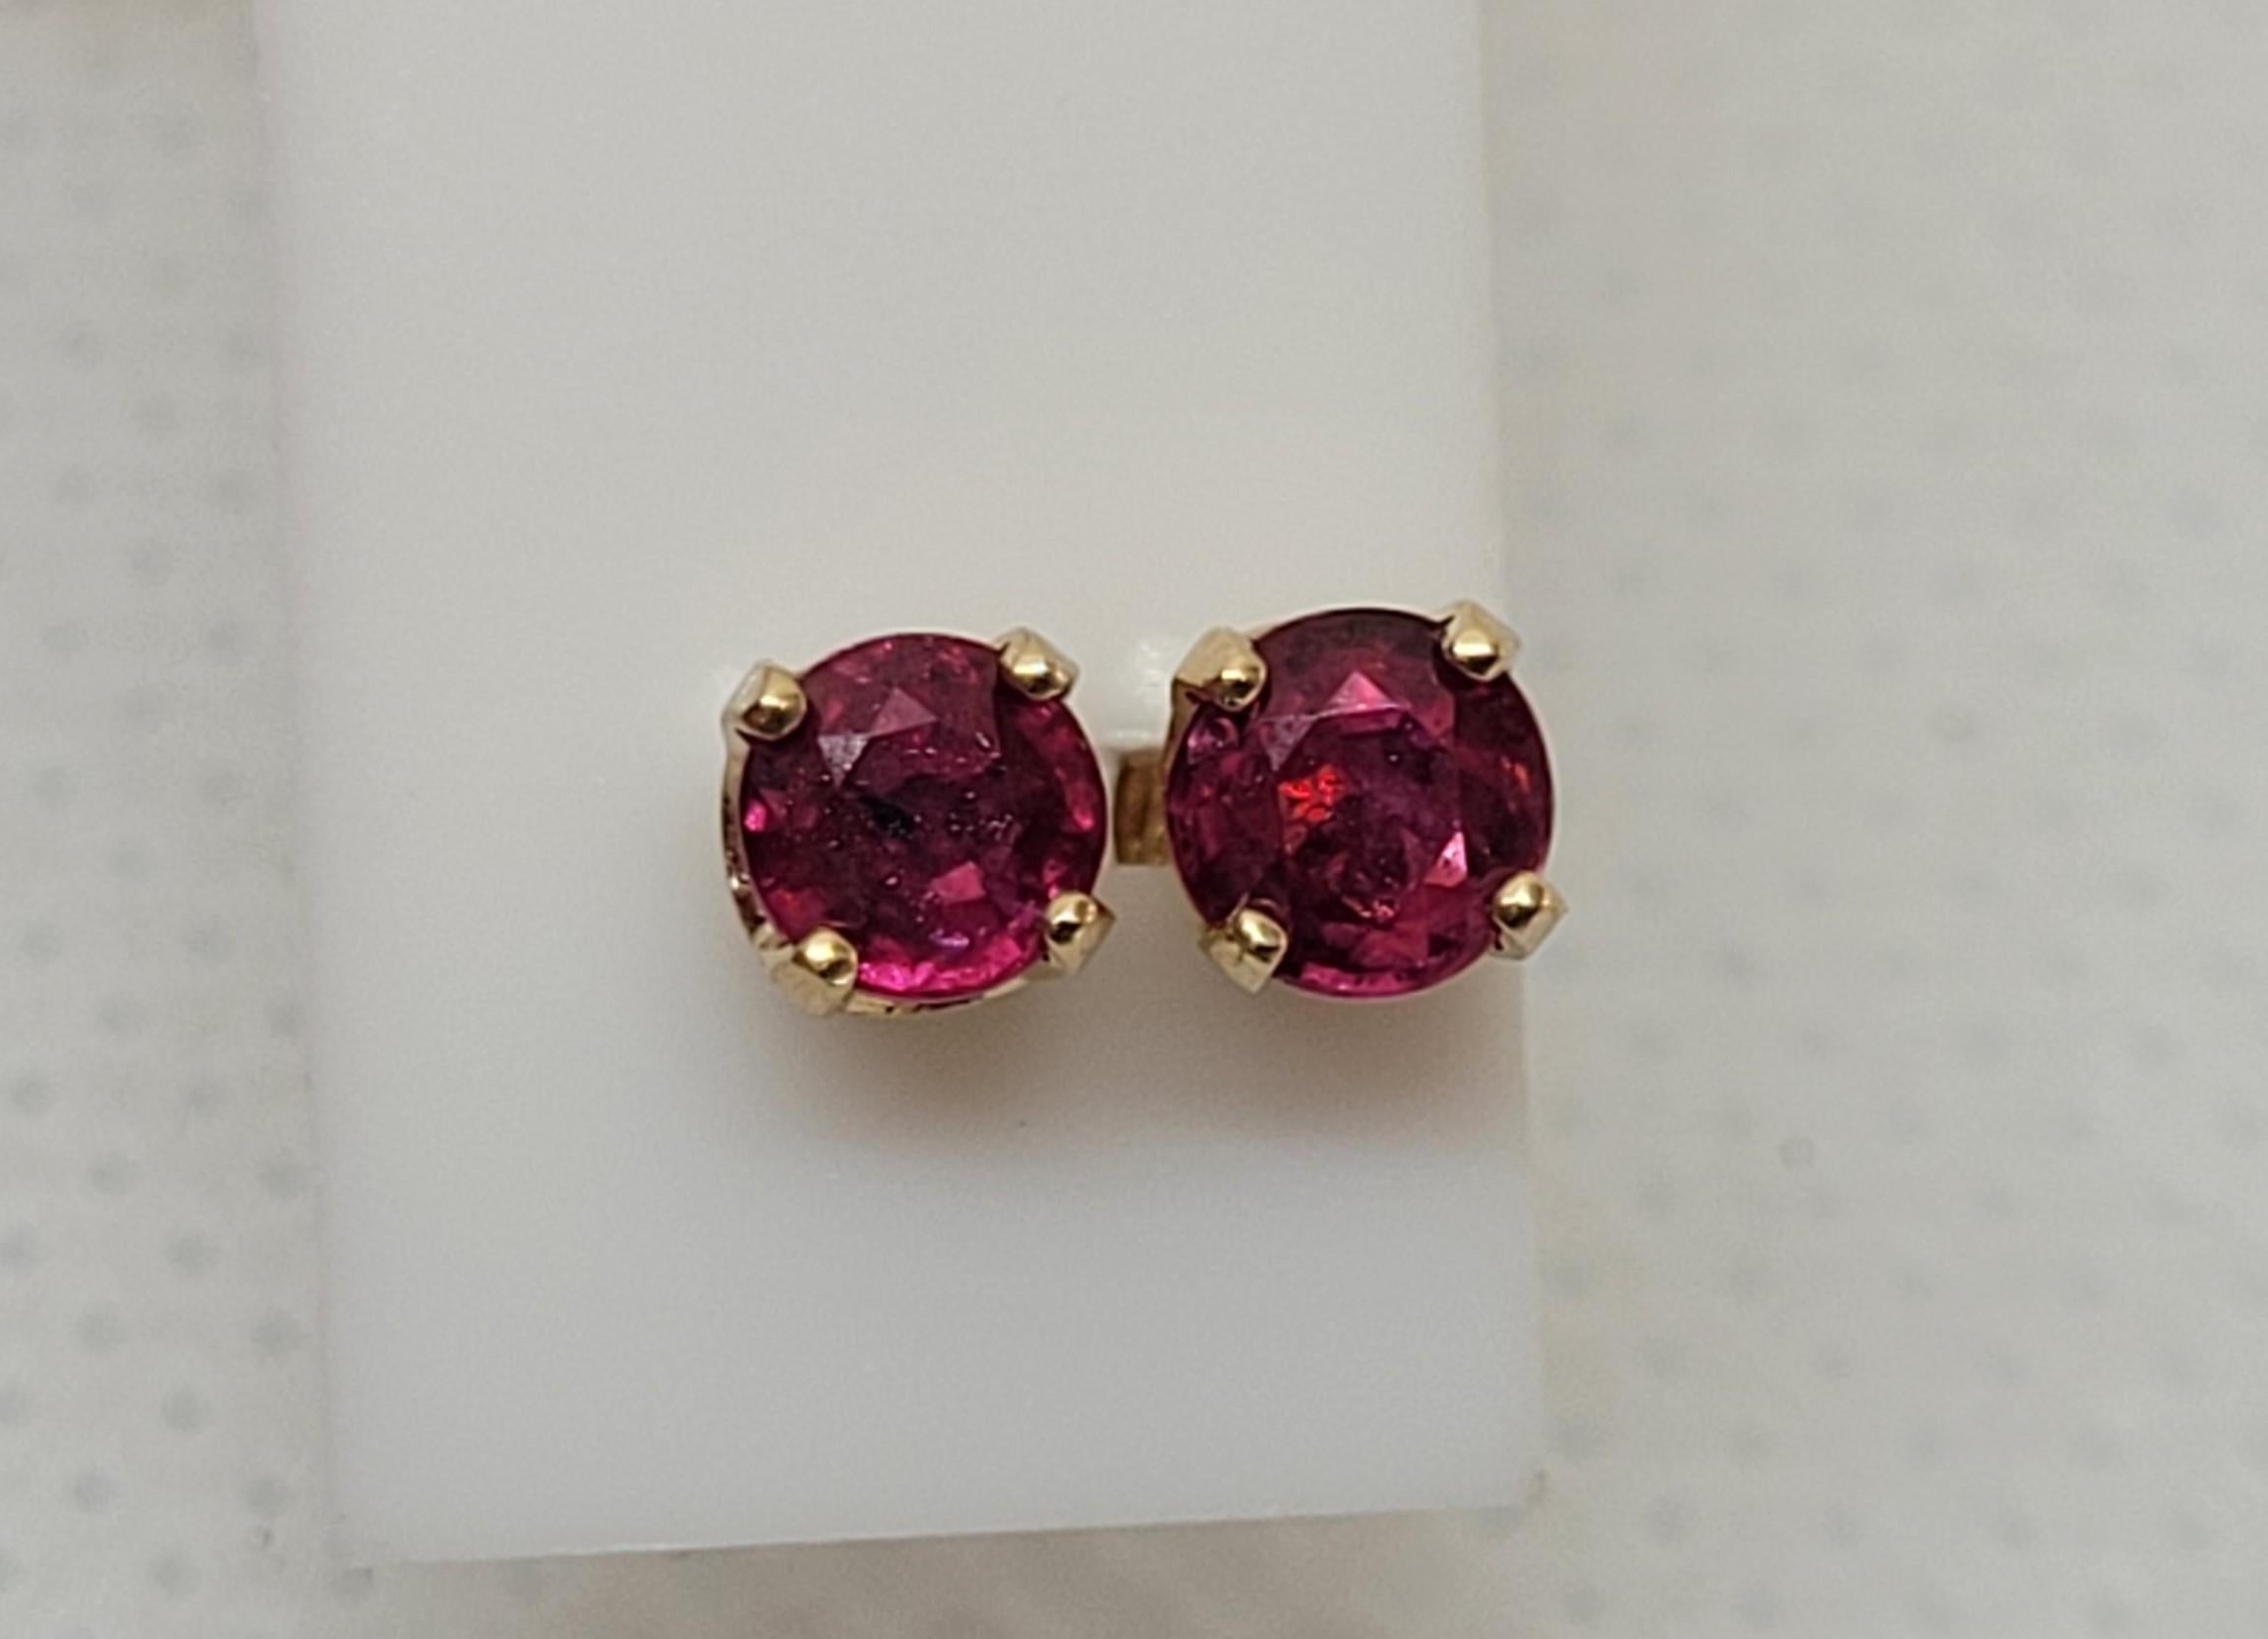 14kt yellow gold four prong stud friction post earrings with two round rubies of approximately .45cttw. The rubies have a red/pink color, have medium inclusions, are 3.7-3.8mm in diameter, and are in good condition. The studs are .75 grams total and